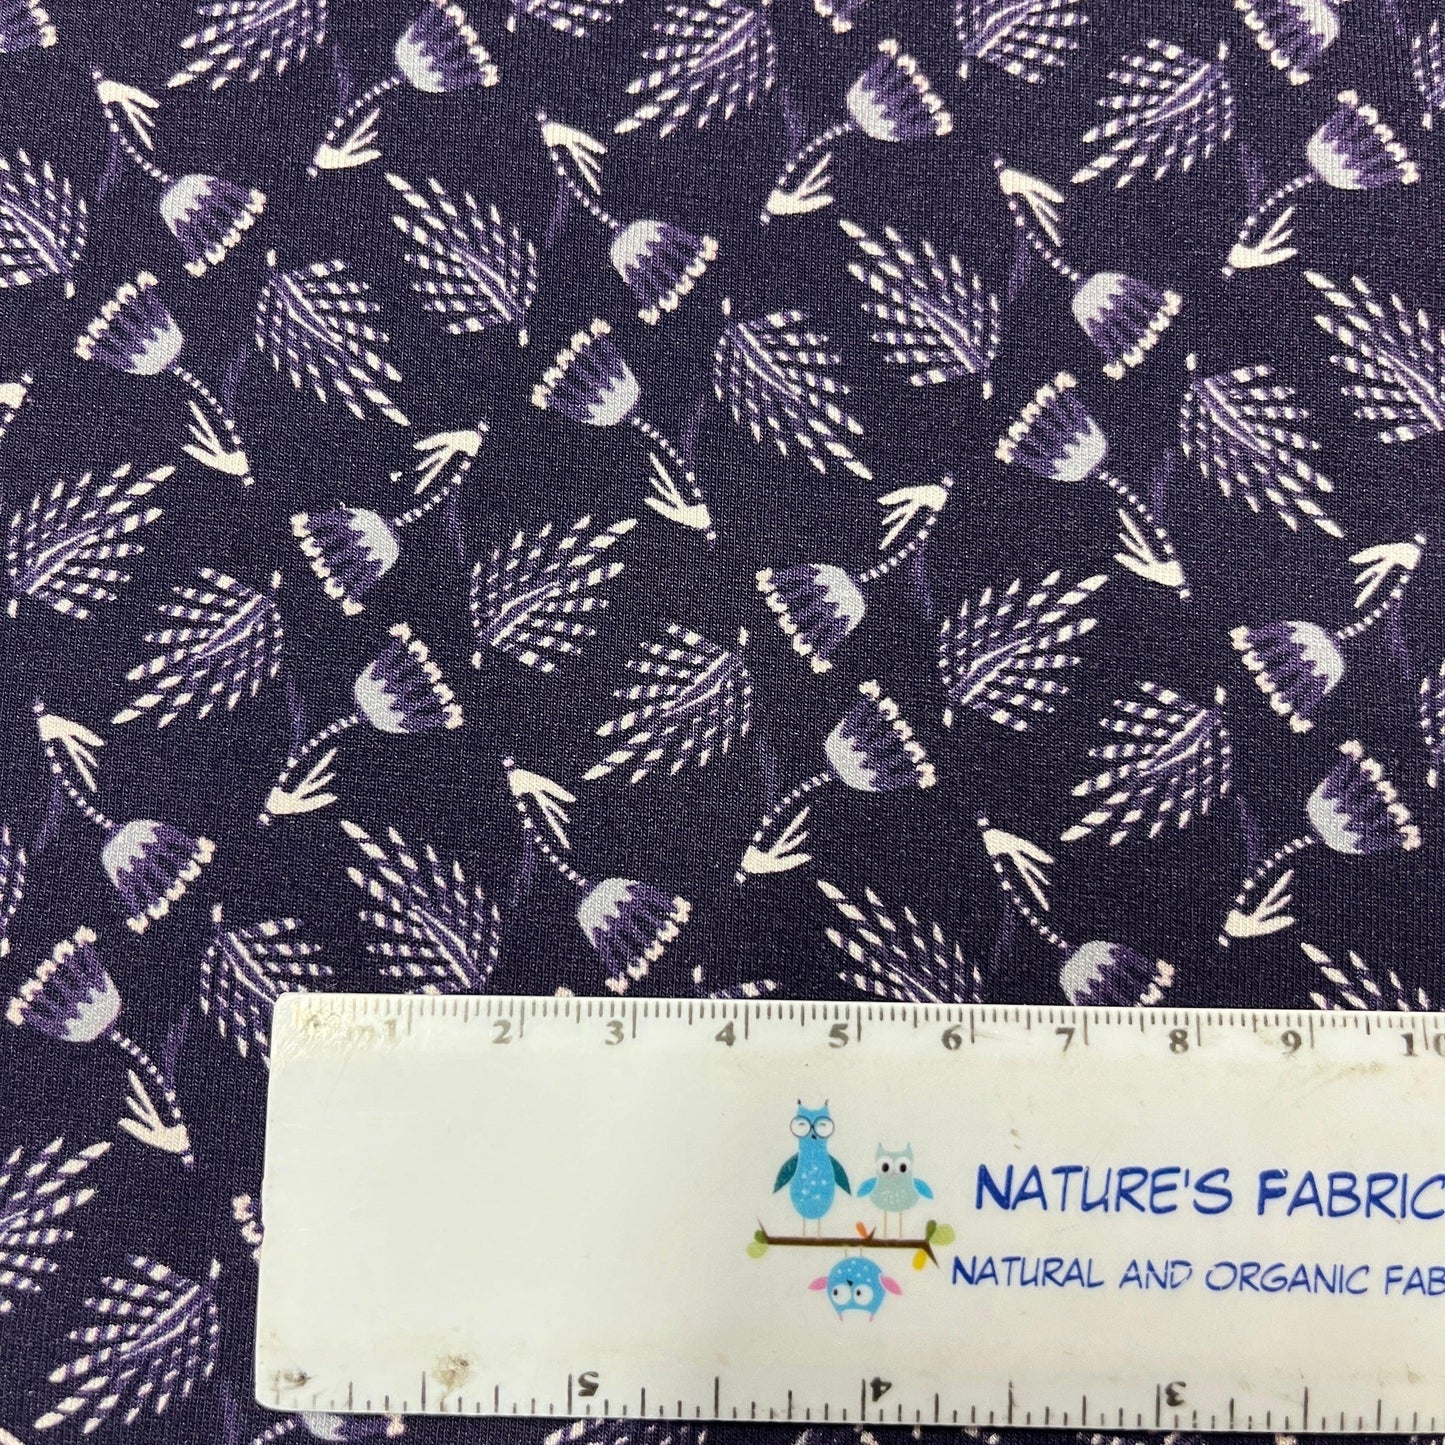 Blue Leaf Floral Fabric on Bamboo/Spandex Jersey - Nature's Fabrics